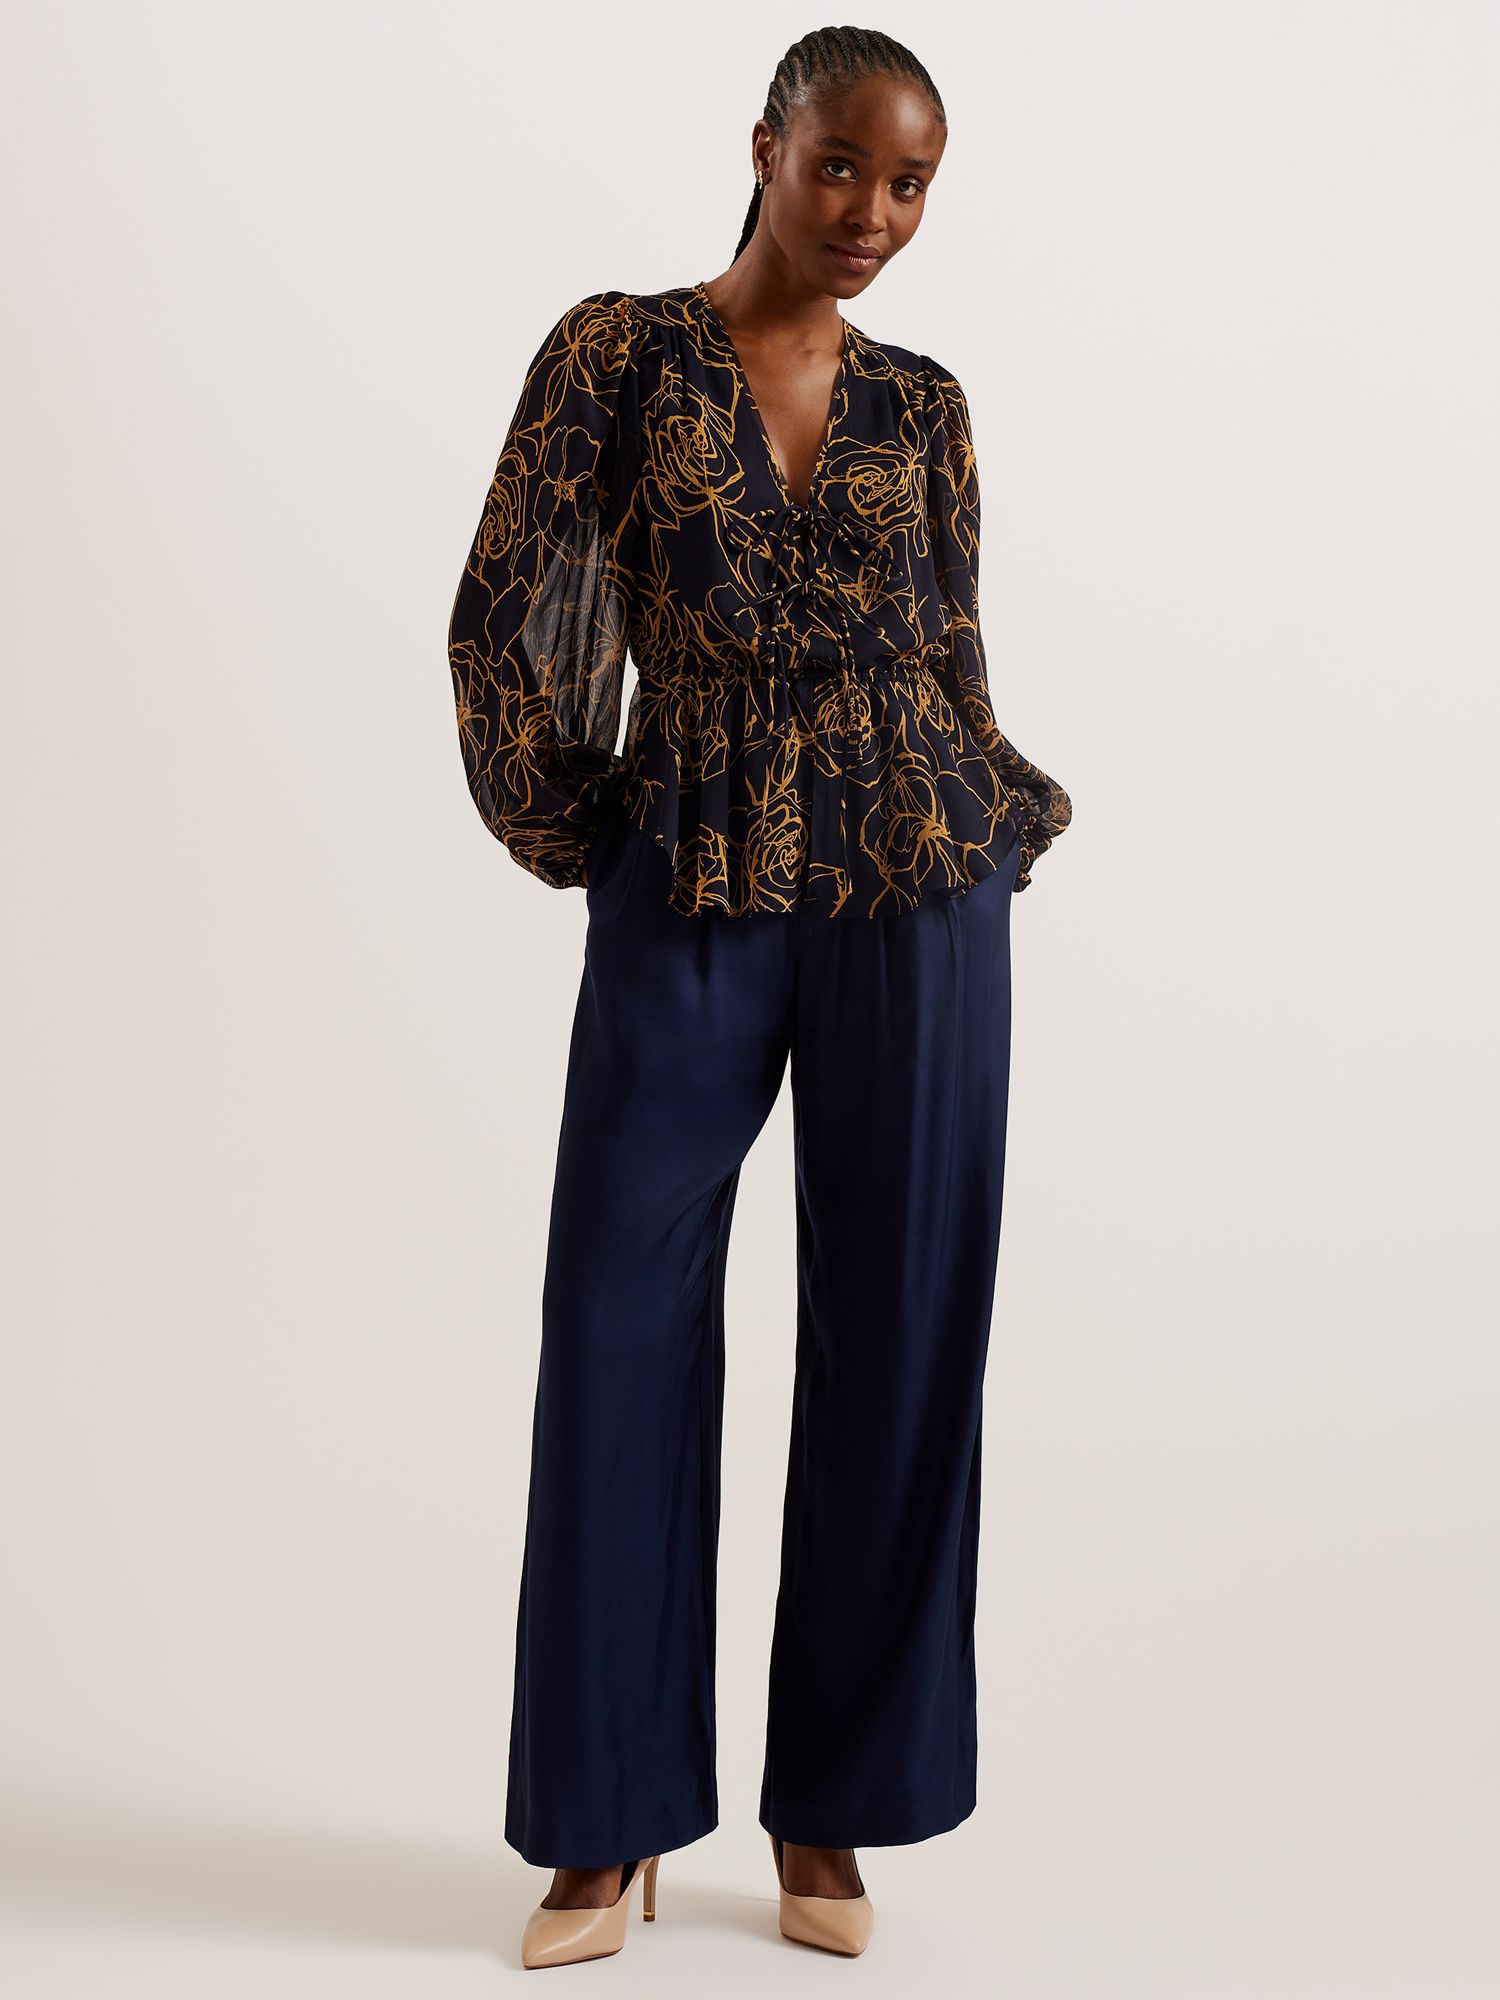 Buy Ted Baker Kazuko Abstract Floral Print Peplum Blouse, Navy/Multi Online at johnlewis.com